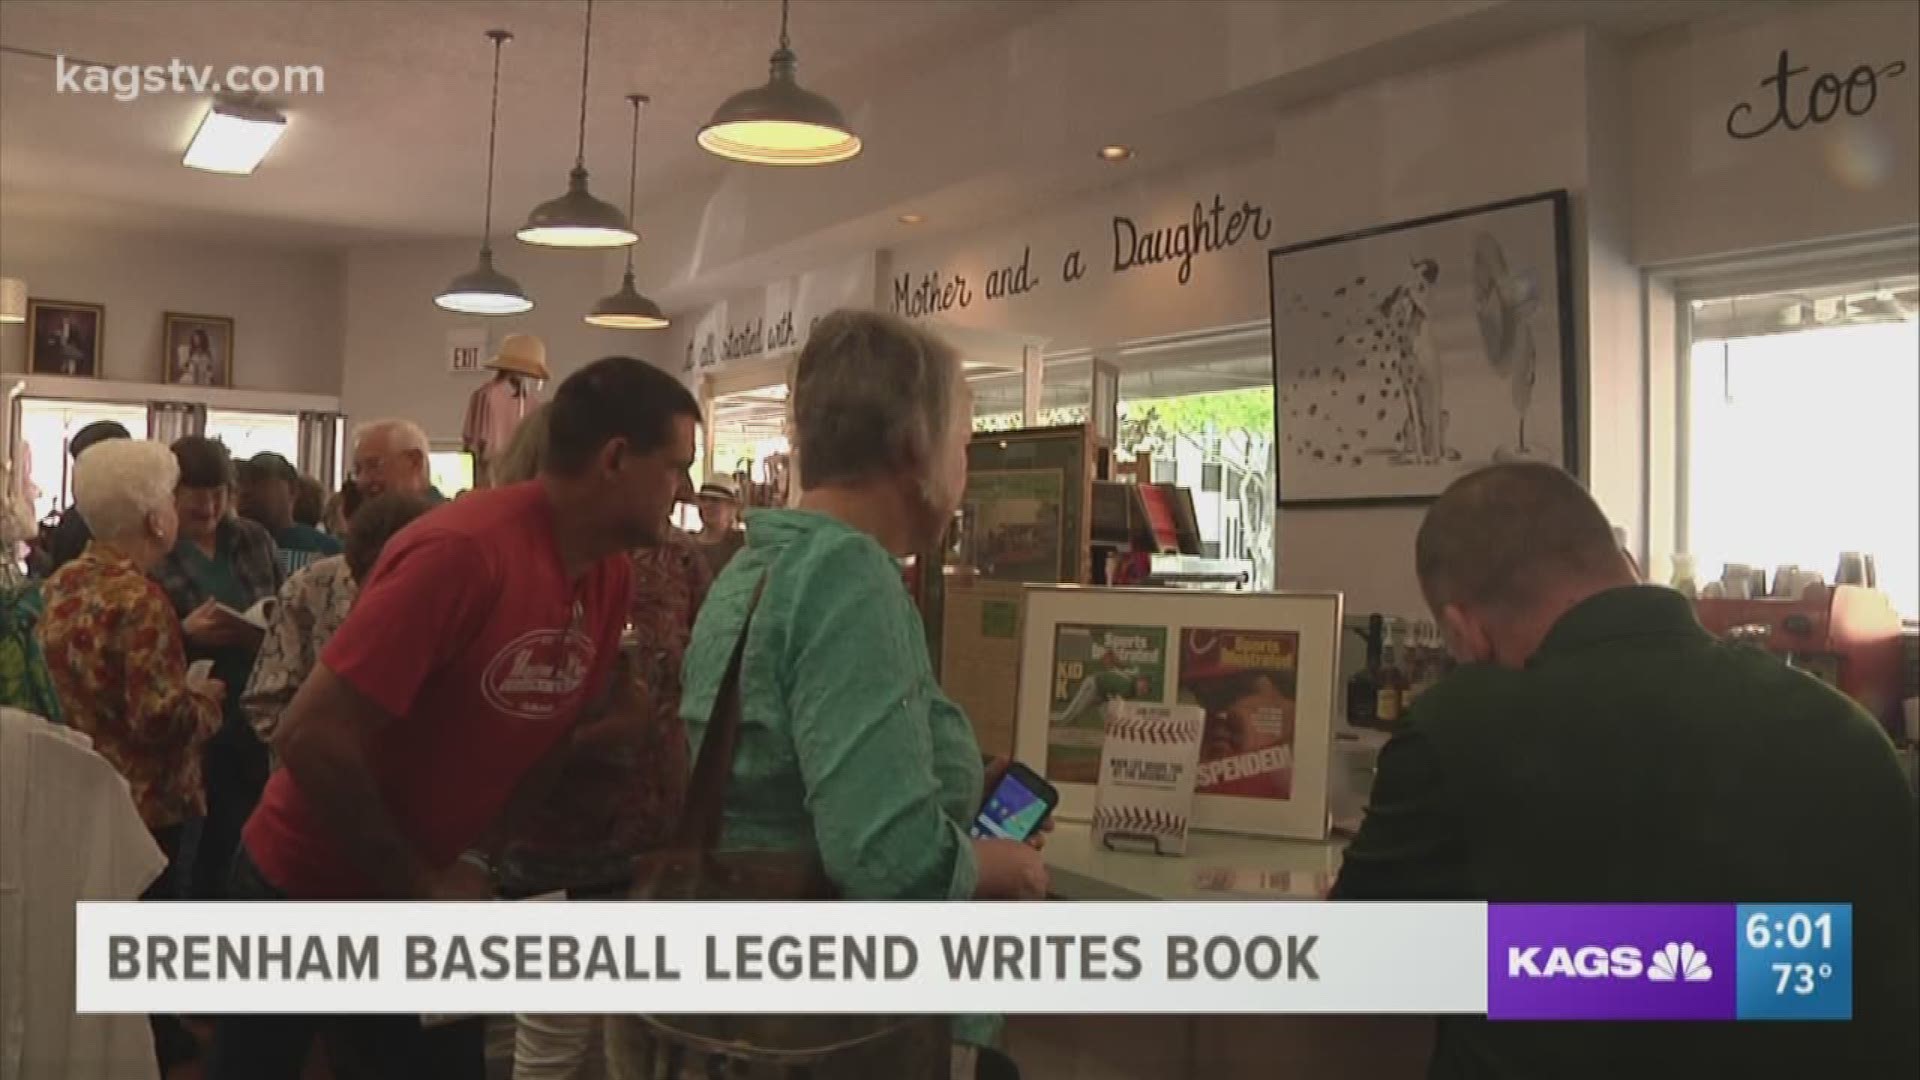 Brenham baseball legend, Jon Peters wrote a book about overcoming his injuries and the dark path it took him down. KAGS Kacey Bowen spoke with him about the journey and suport from the community.